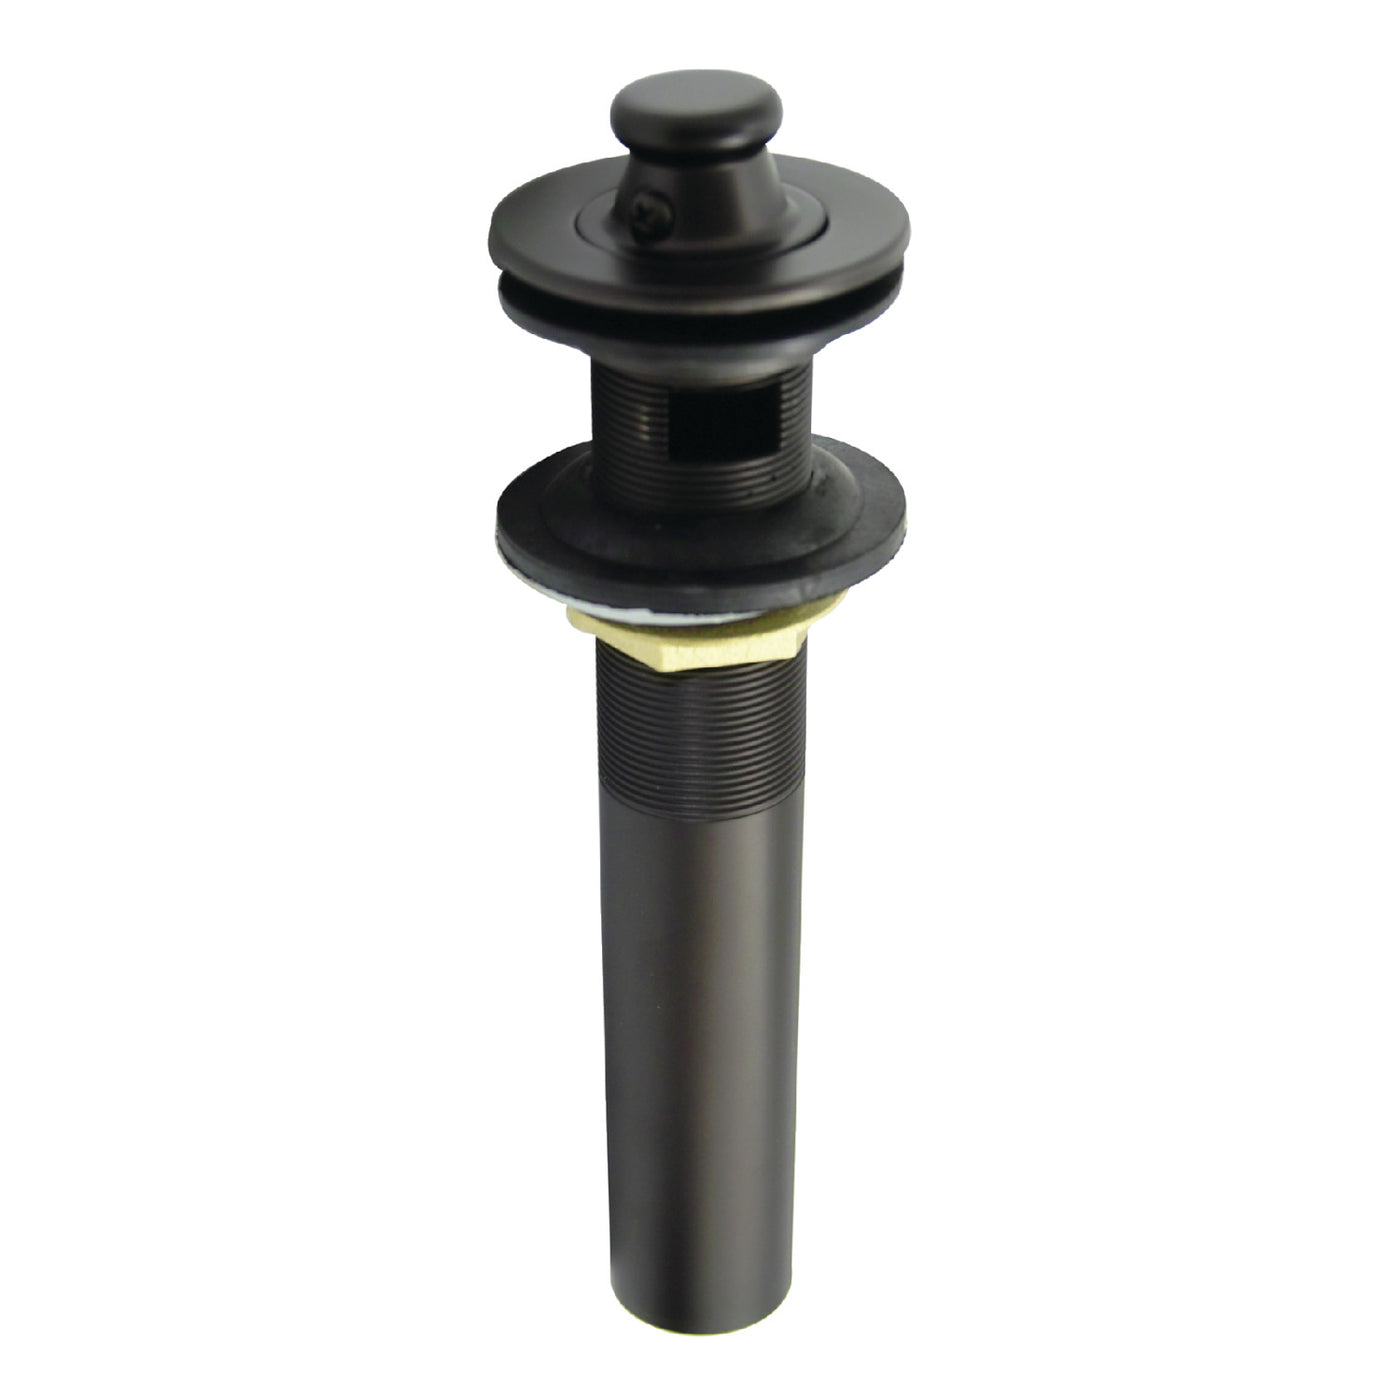 Elements of Design EB3005 Lift and Turn Sink Drain with Overflow, 17 Gauge, Oil Rubbed Bronze